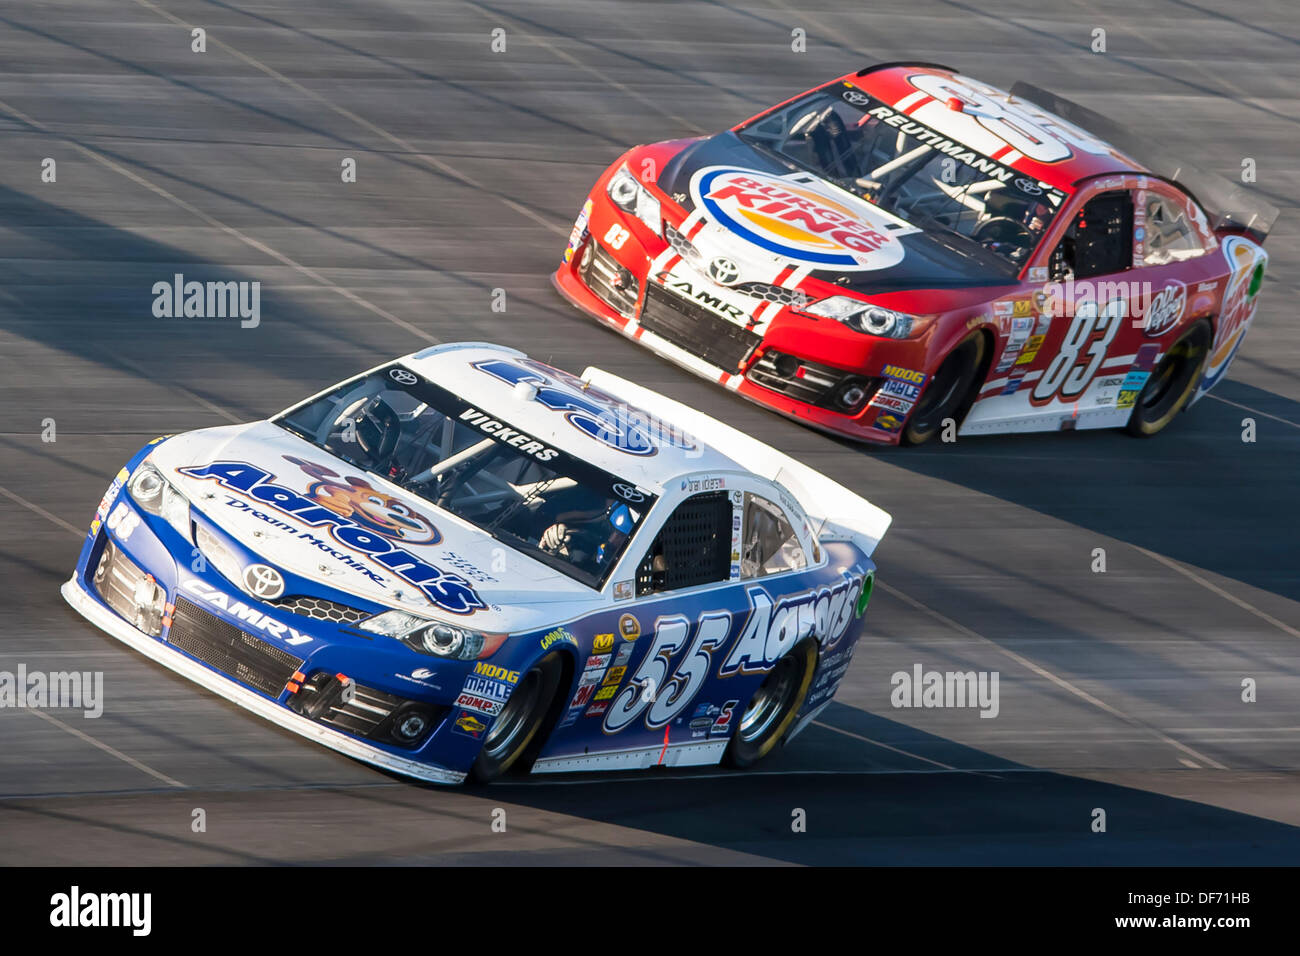 Dover, DE, USA. 29th Sep, 2013. Dover, DE - Sep 29, 2013: Brian Vickers (55) battles David Reutimann (83) during the AAA 400 at Dover International Speedway in Dover, DE. © csm/Alamy Live News Stock Photo